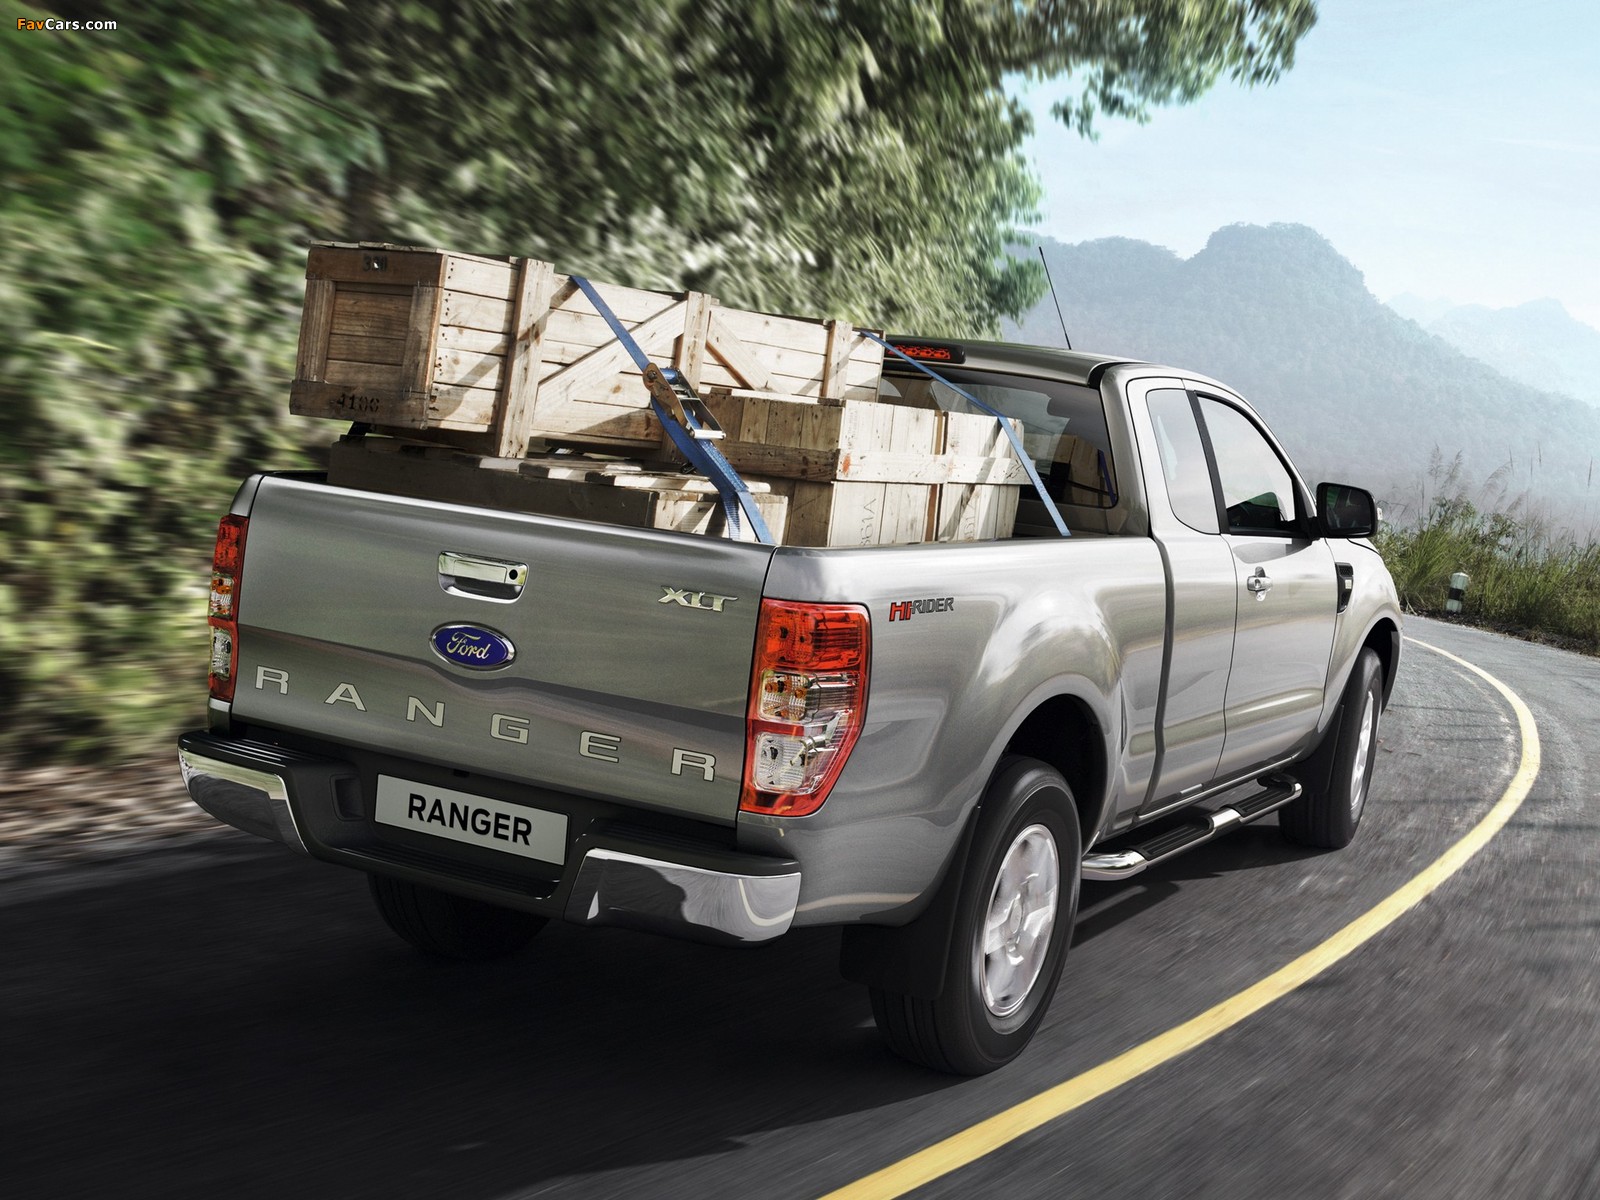 Ford Ranger Extended Cab XLT 2011 pictures (1600 x 1200)